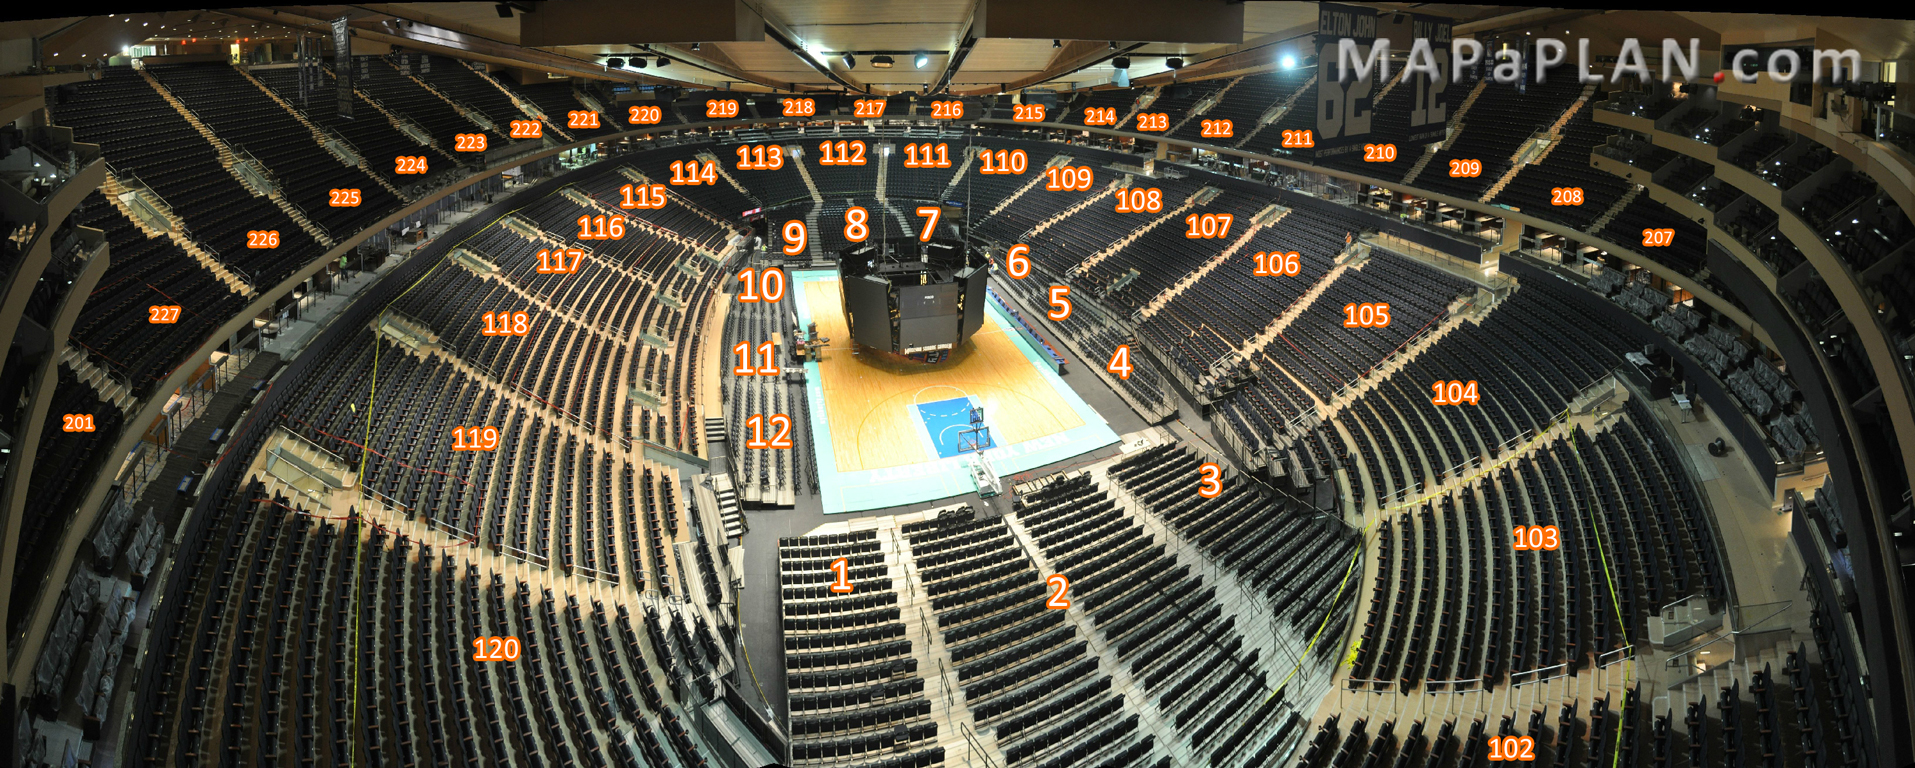 madison square garden seating chart 02 interactive basketball 3d panoramic photo high resolution